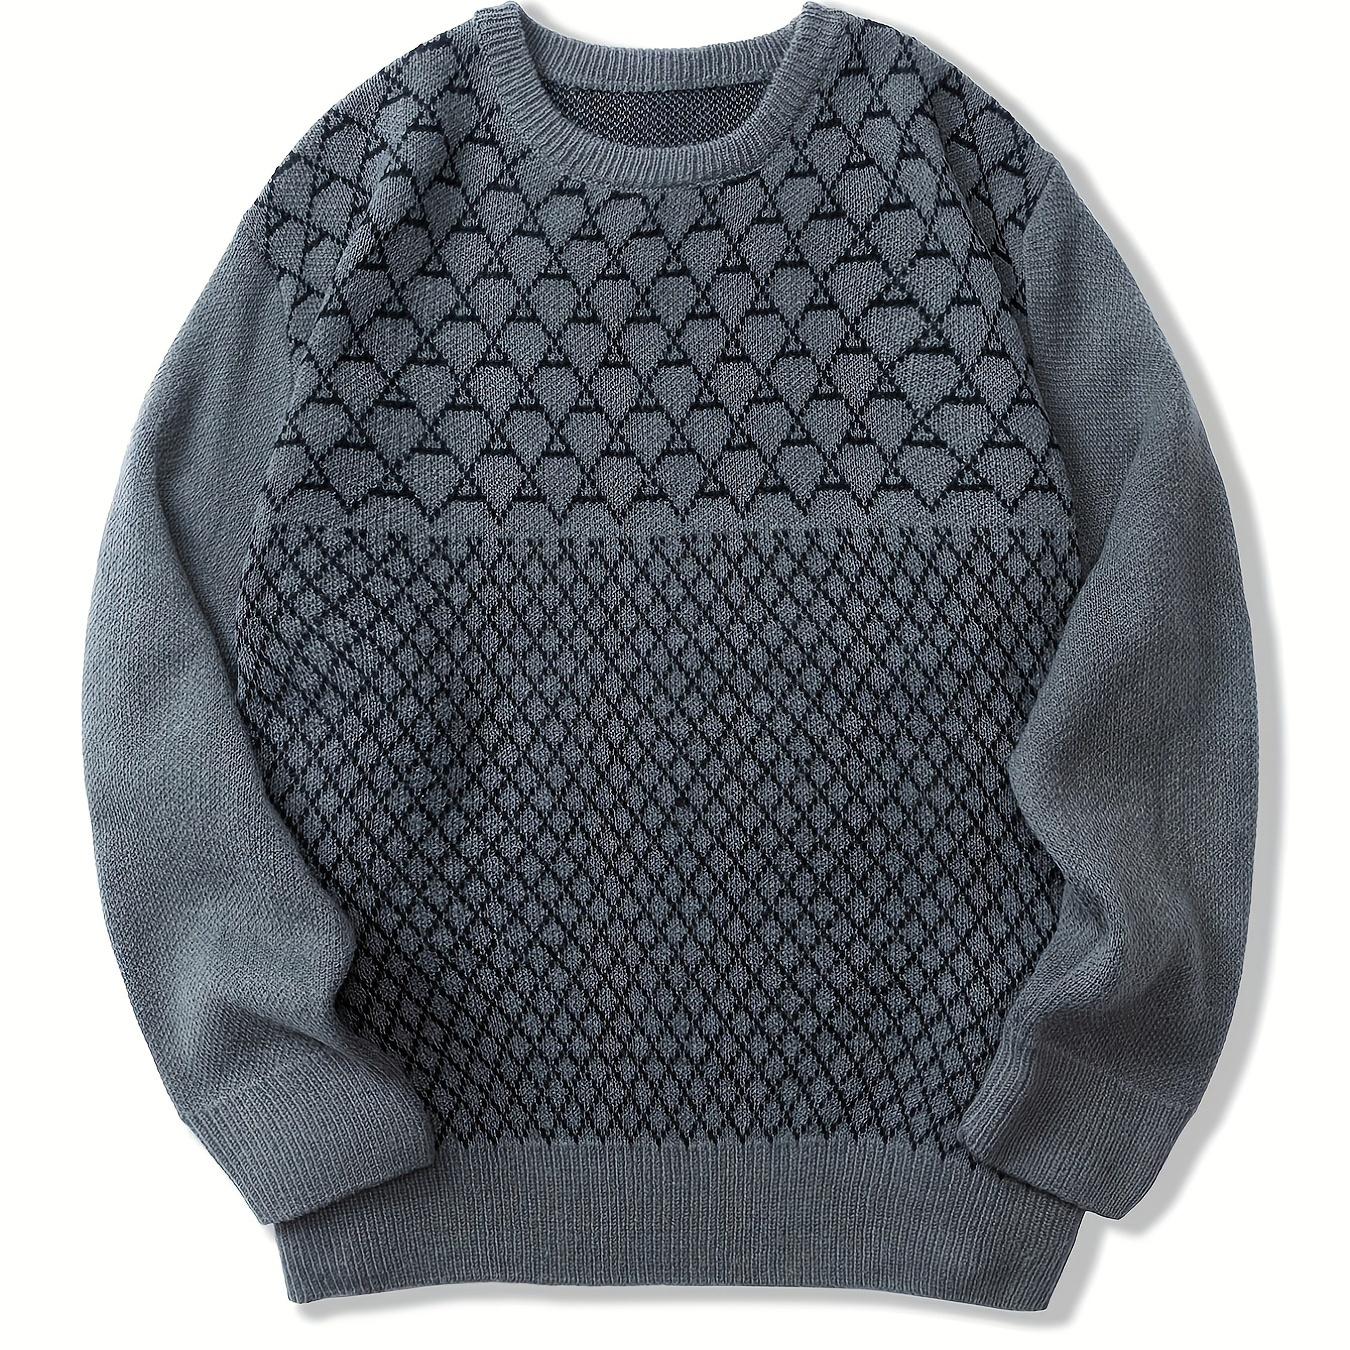 All Match Knitted Diamond Pattern Sweater, Men's Casual Warm